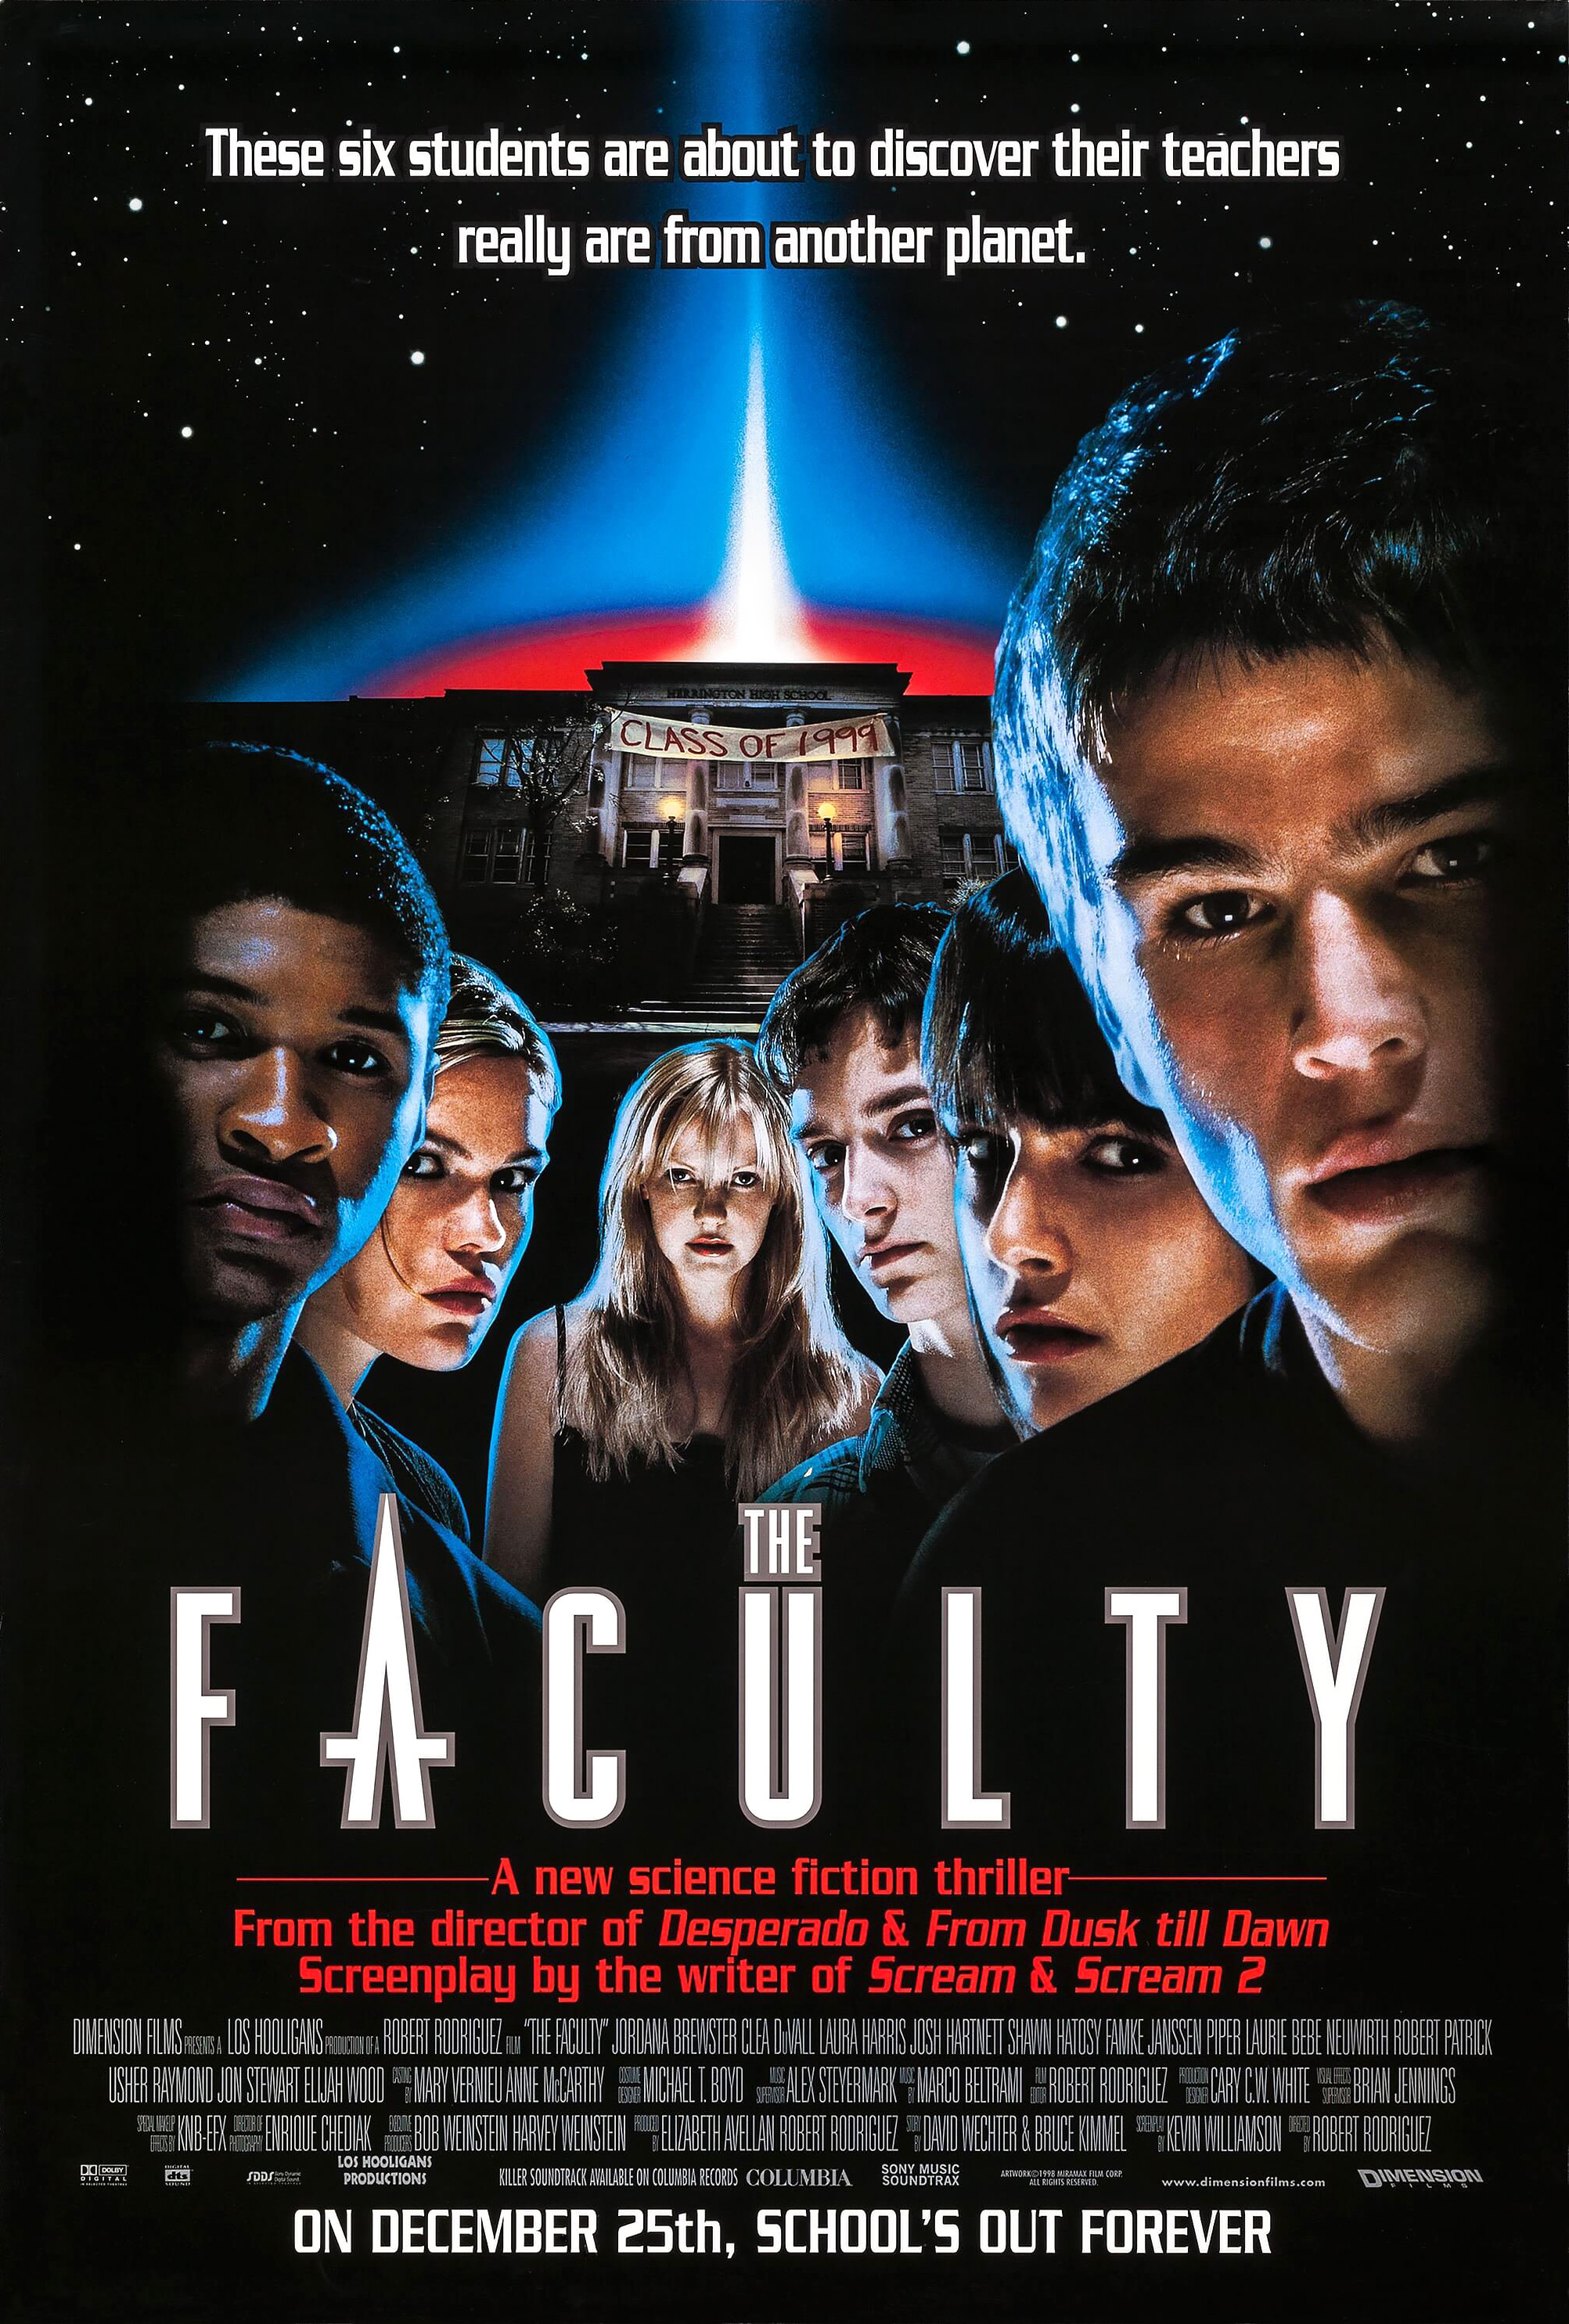 image for the faculty